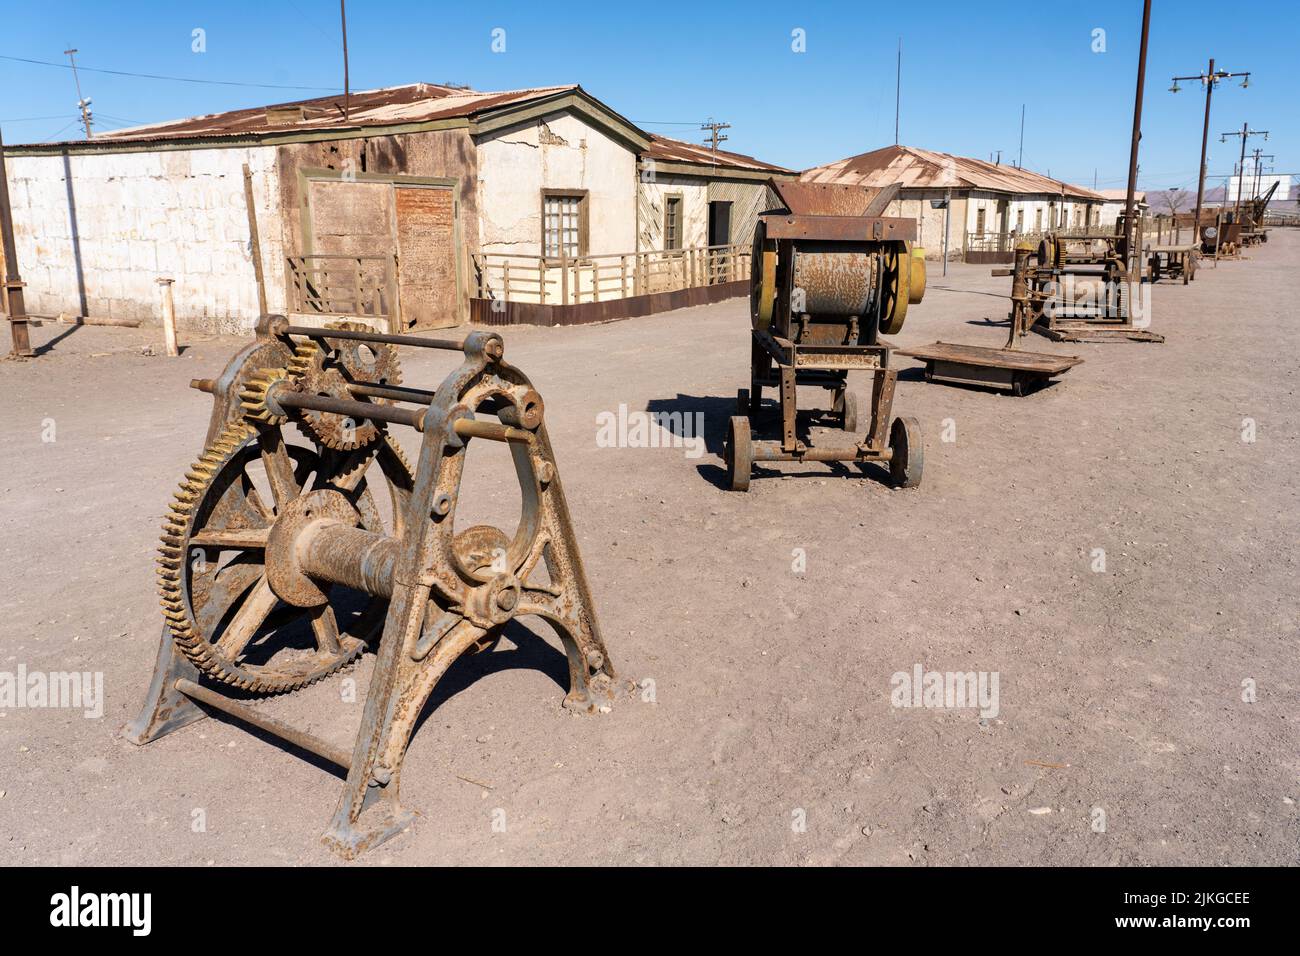 Outdoor museum display of machinery used in the saltpeter works in Humberstone, Chile.  Employee housing behind. Stock Photo